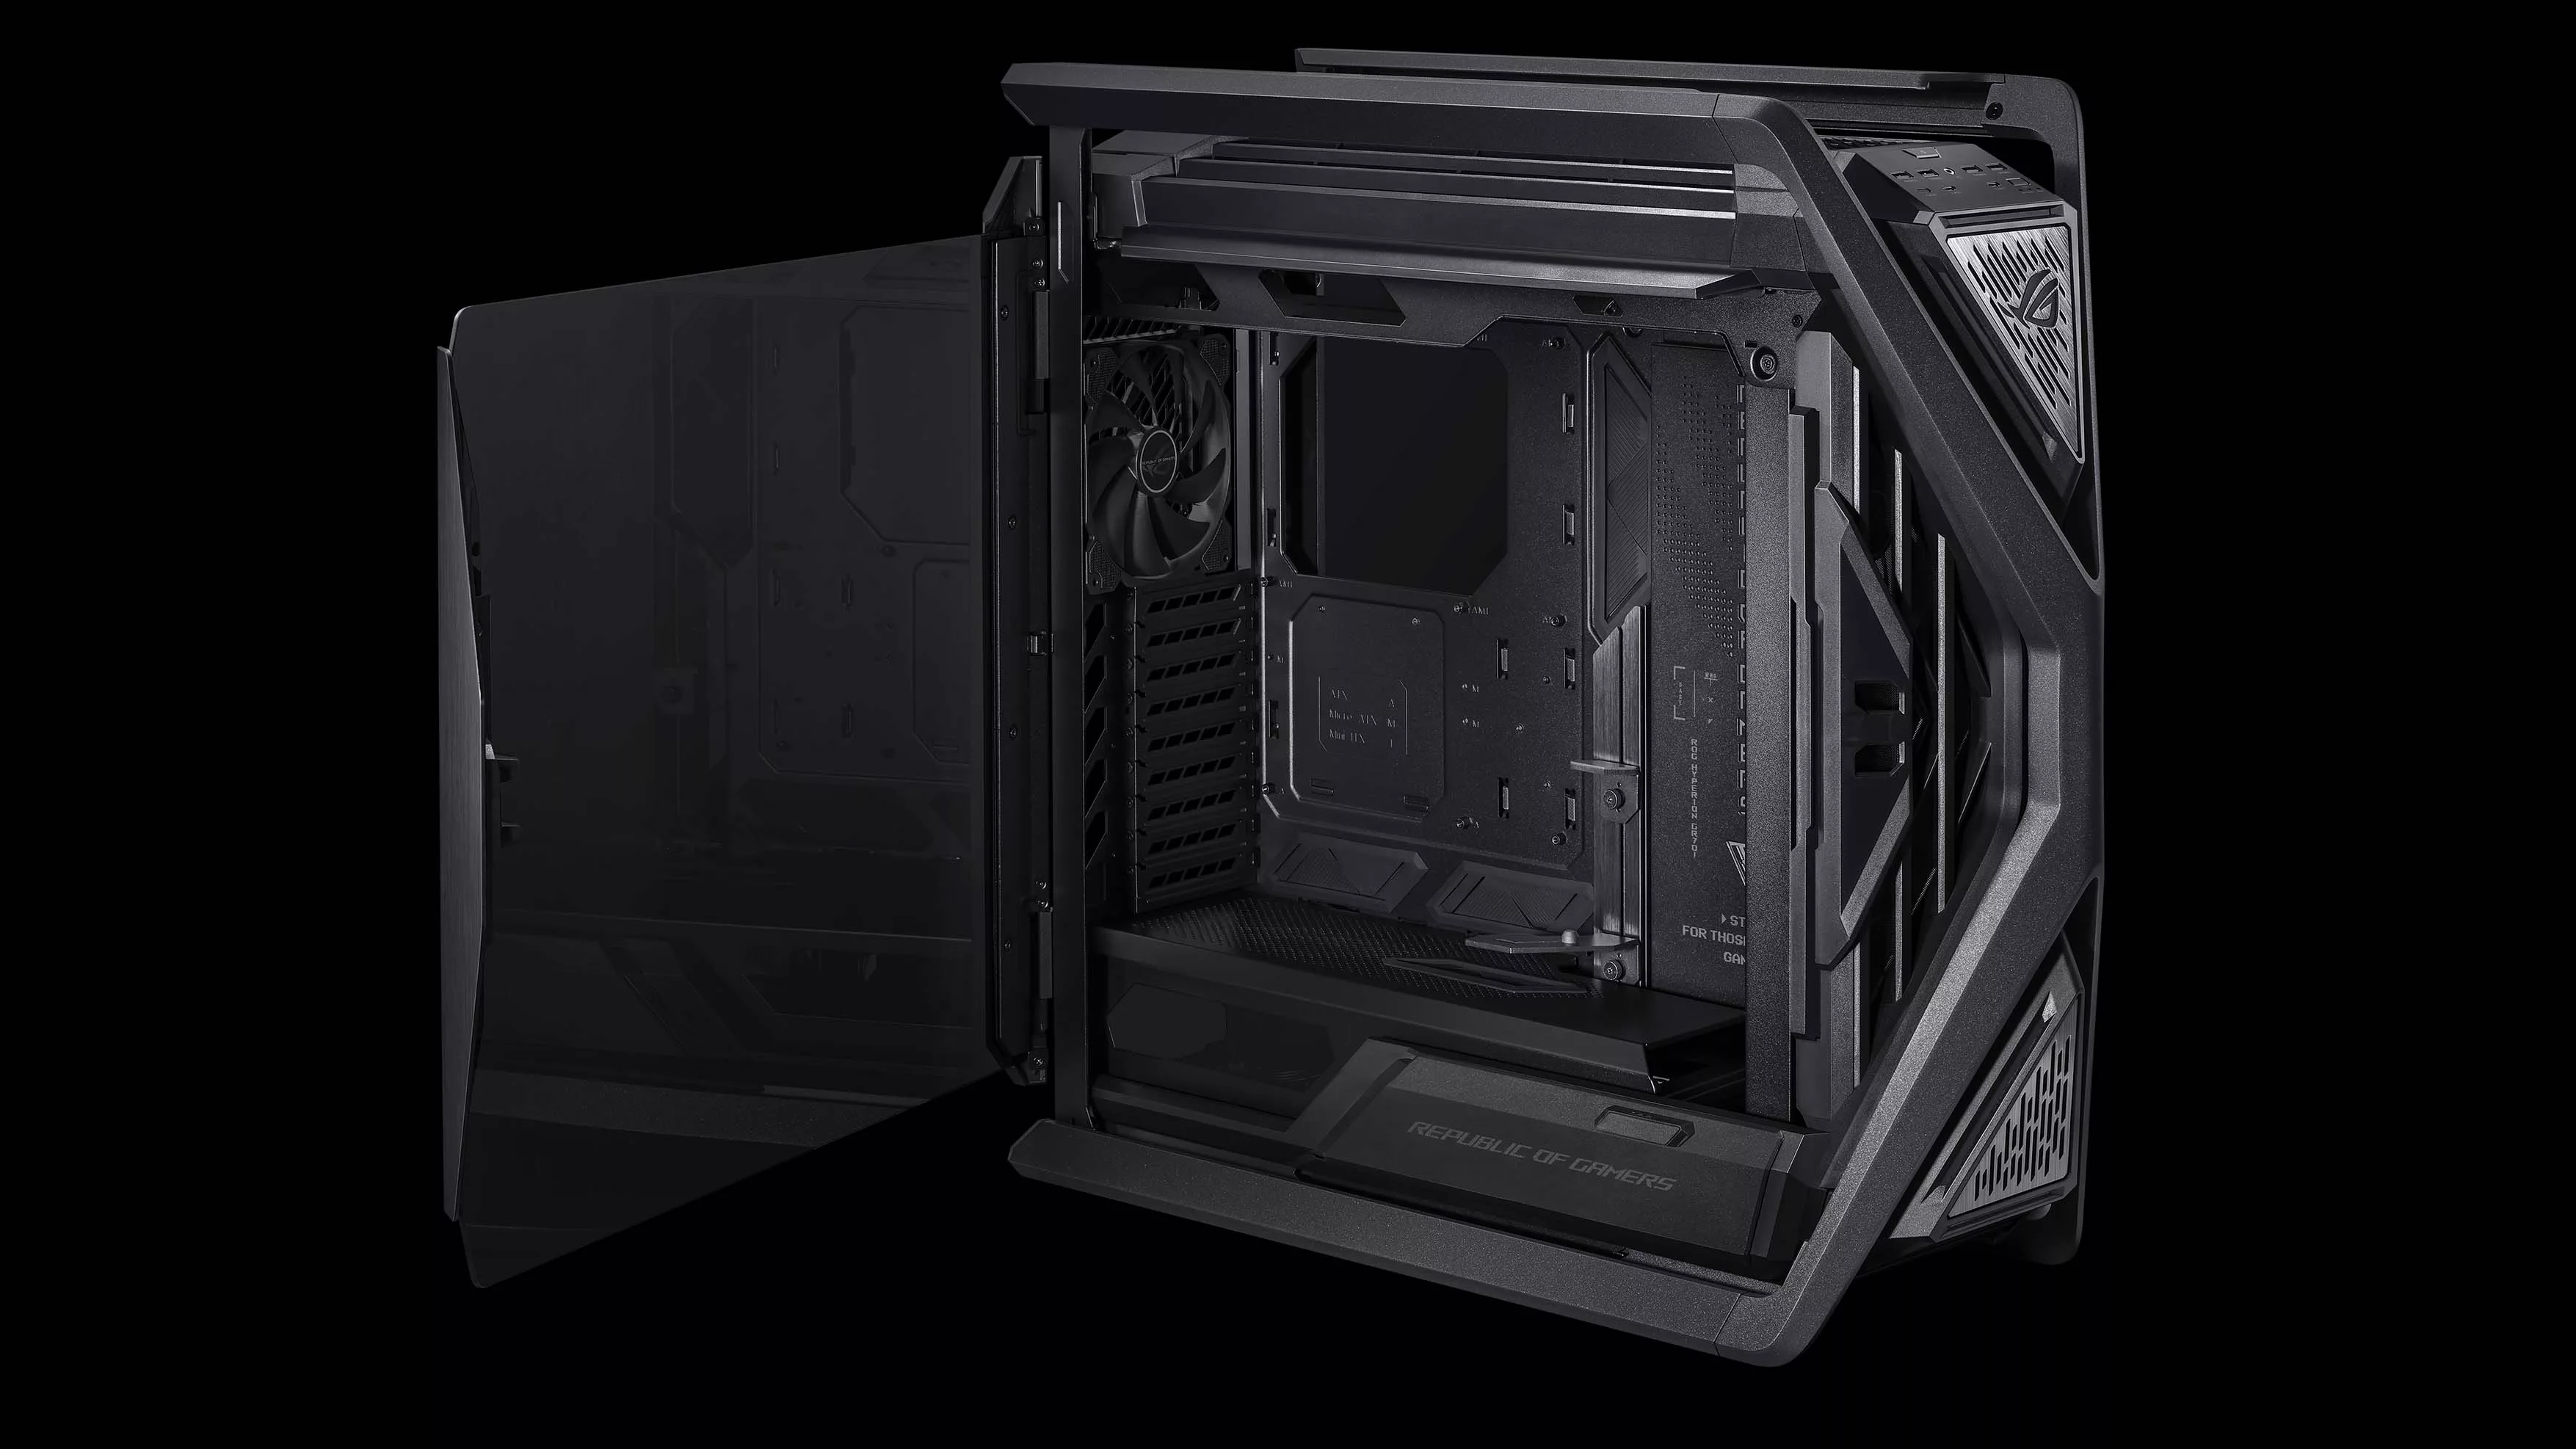 A side view of the ROG Hyperion case with its side panel opened, on a black background.